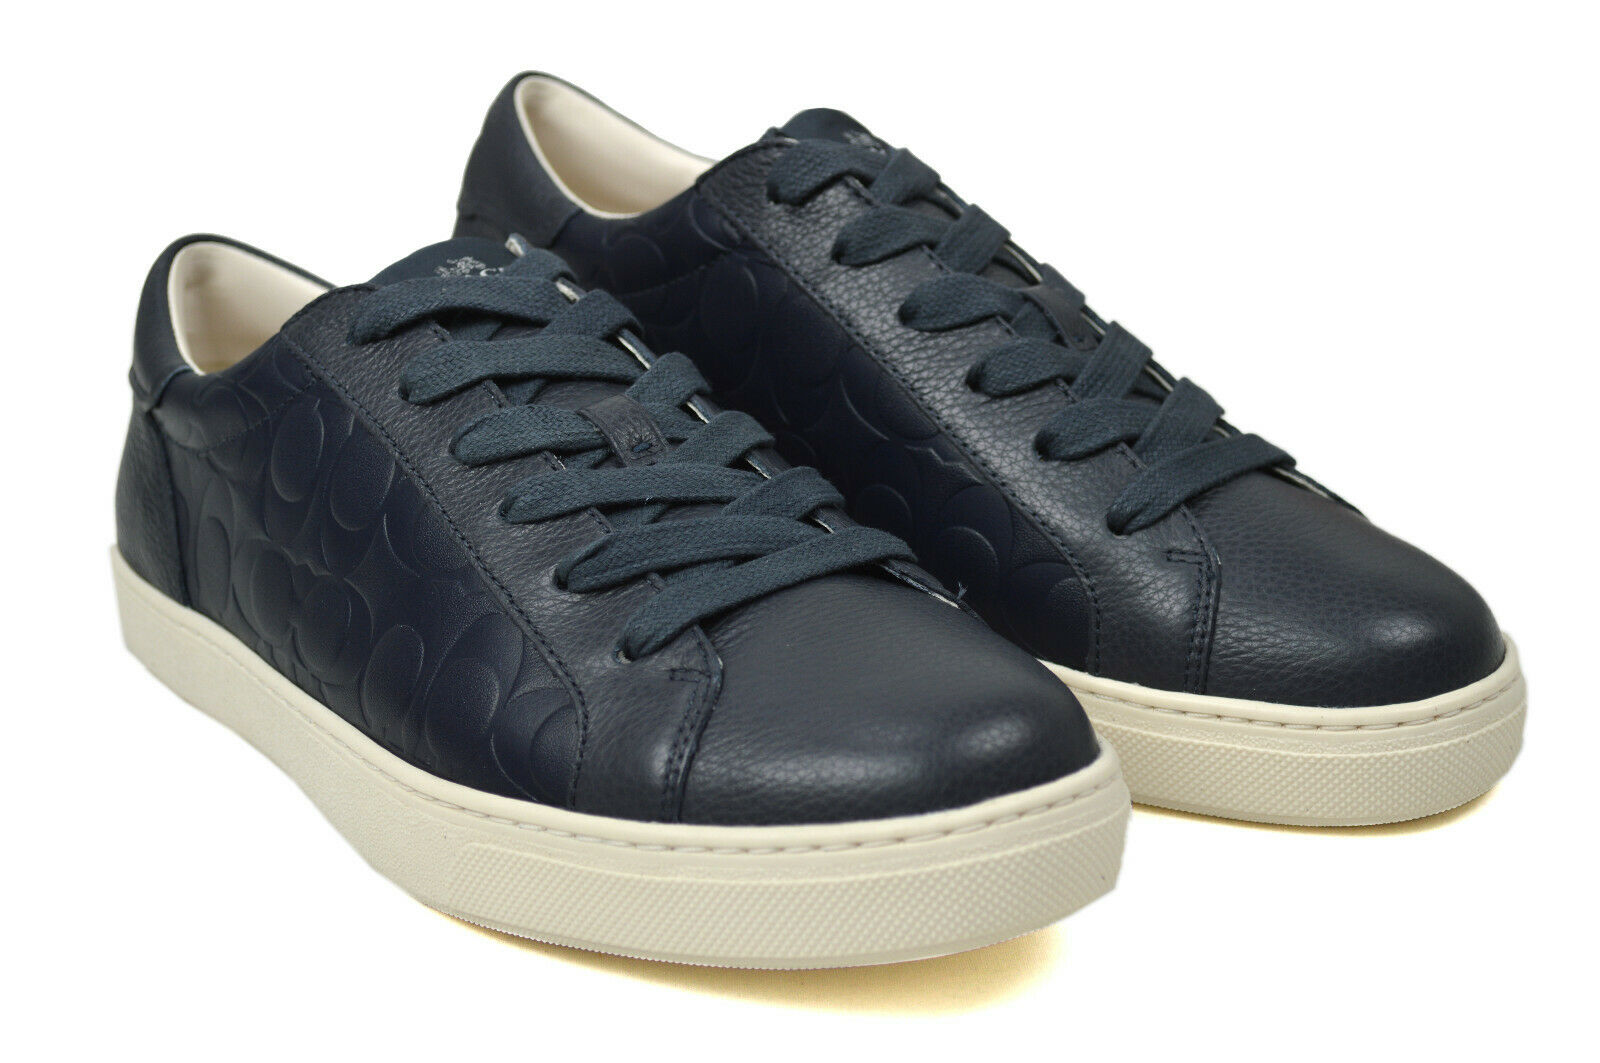 New  Coach Mens C126 Navy Blue Signature Leather Low Top Sneakers Sz 9.5 D 8994-3 - image 1 of 4